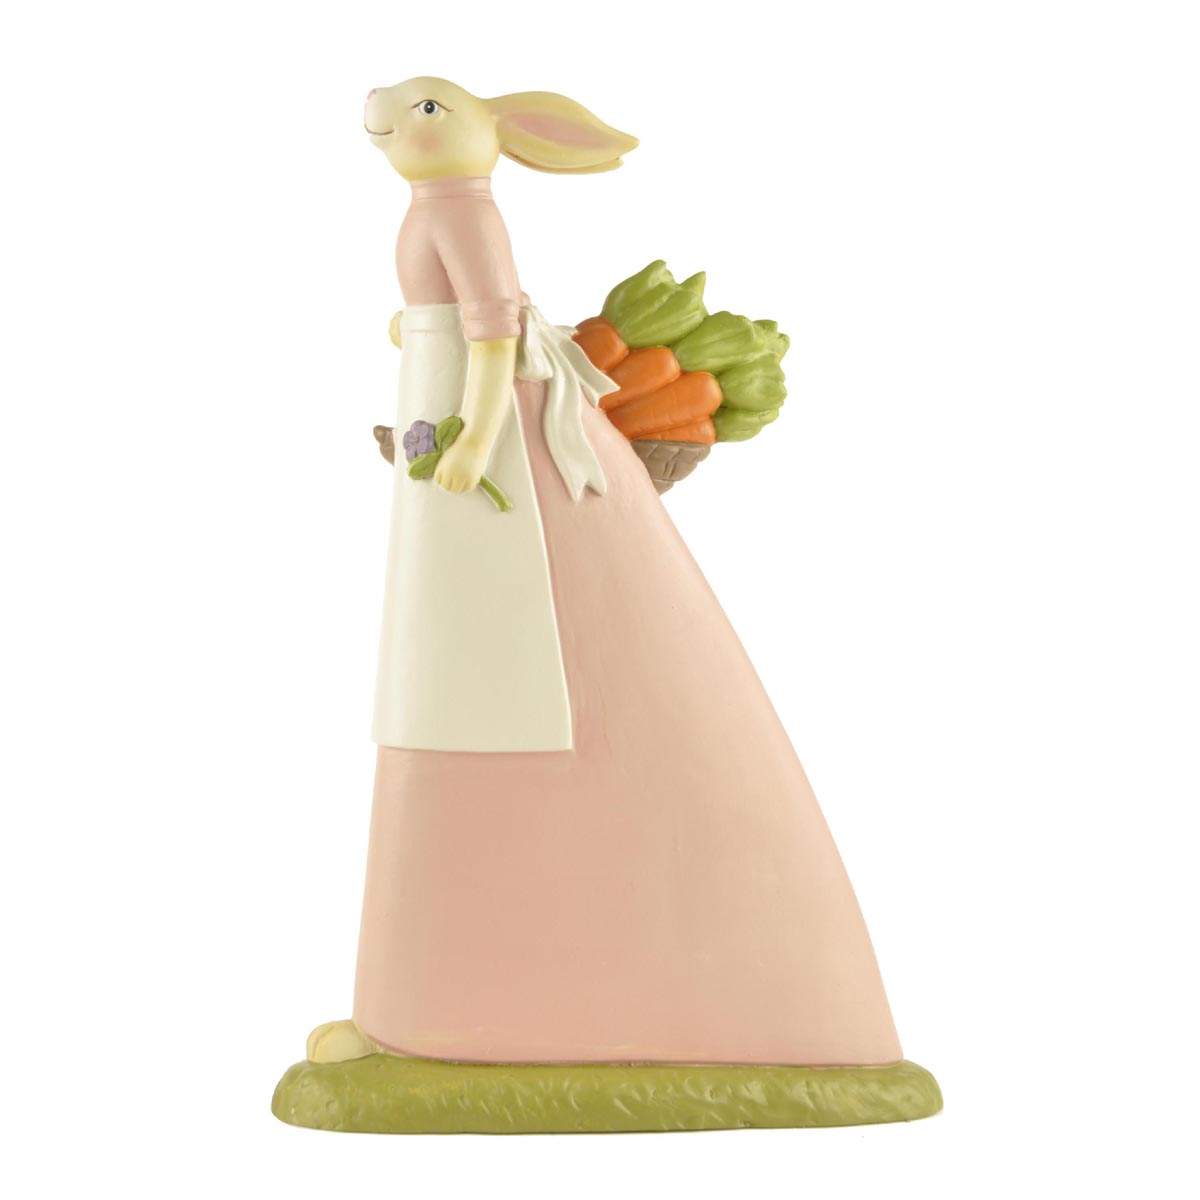 Ennas easter figurines oem for holiday gift-1